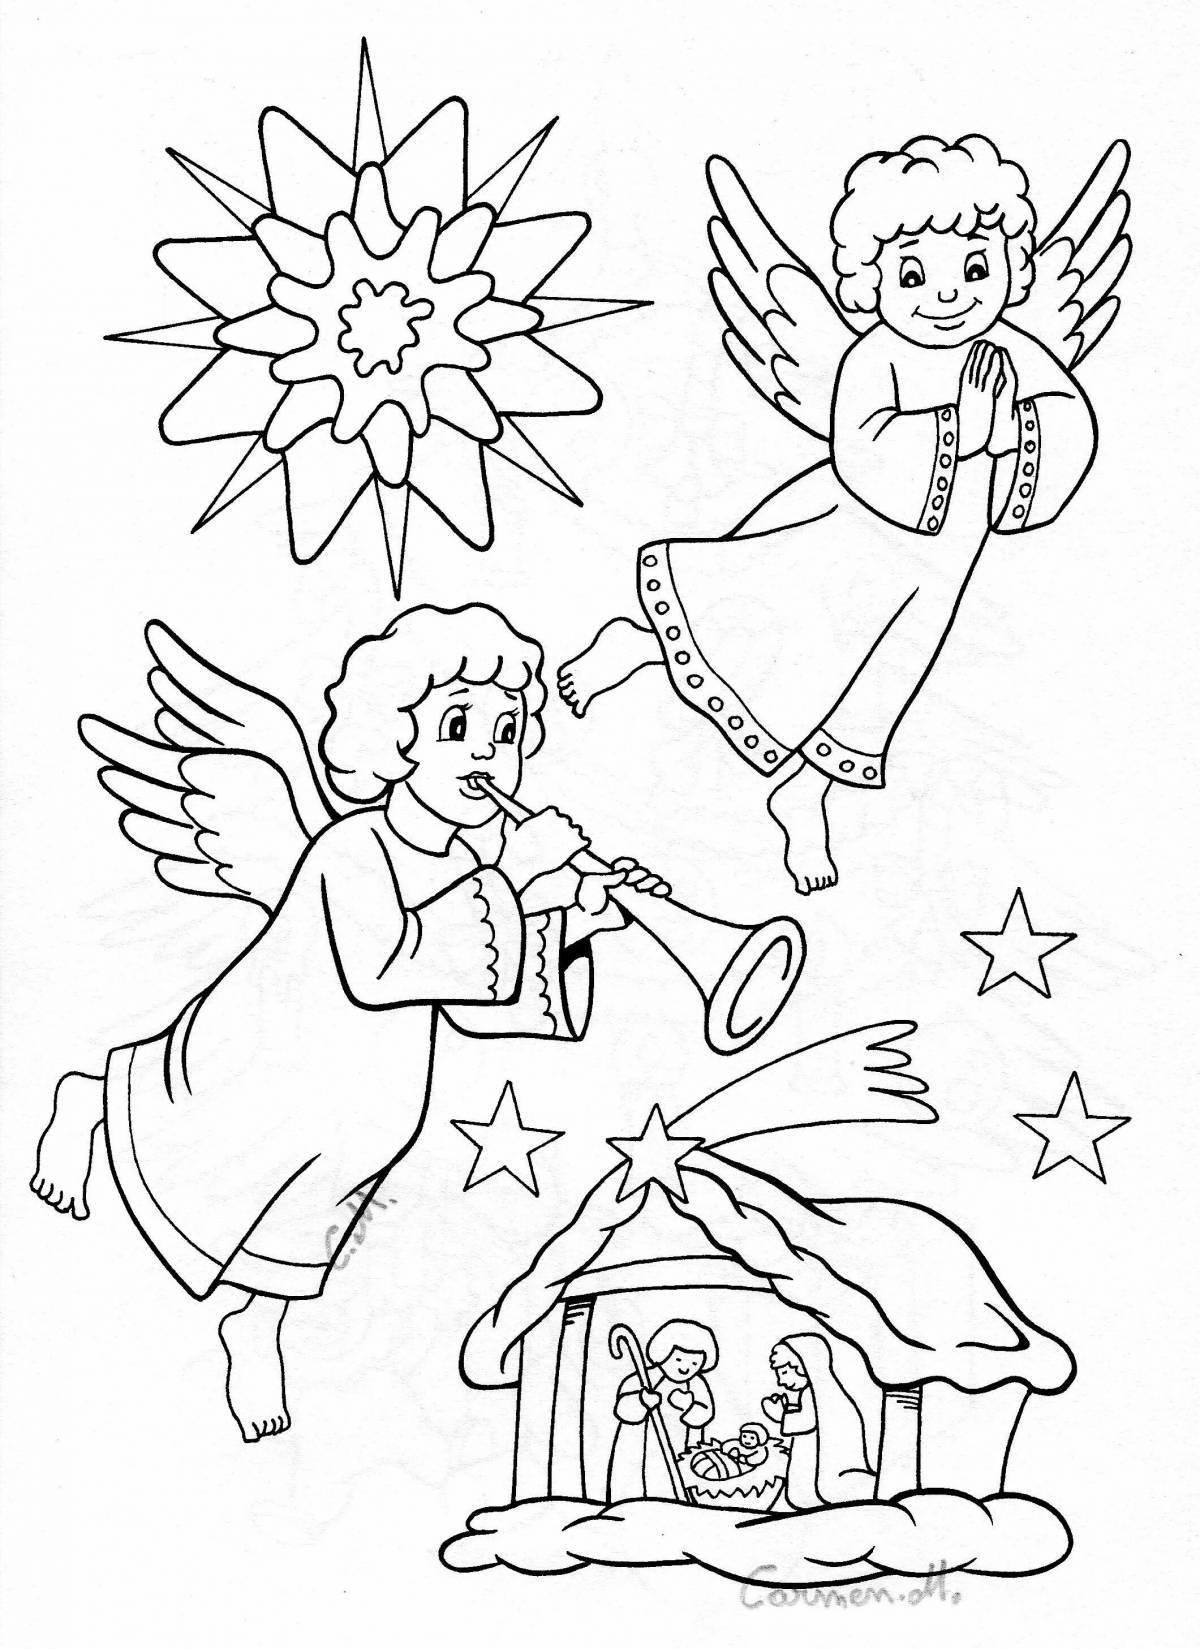 Shiny Christmas angels coloring book